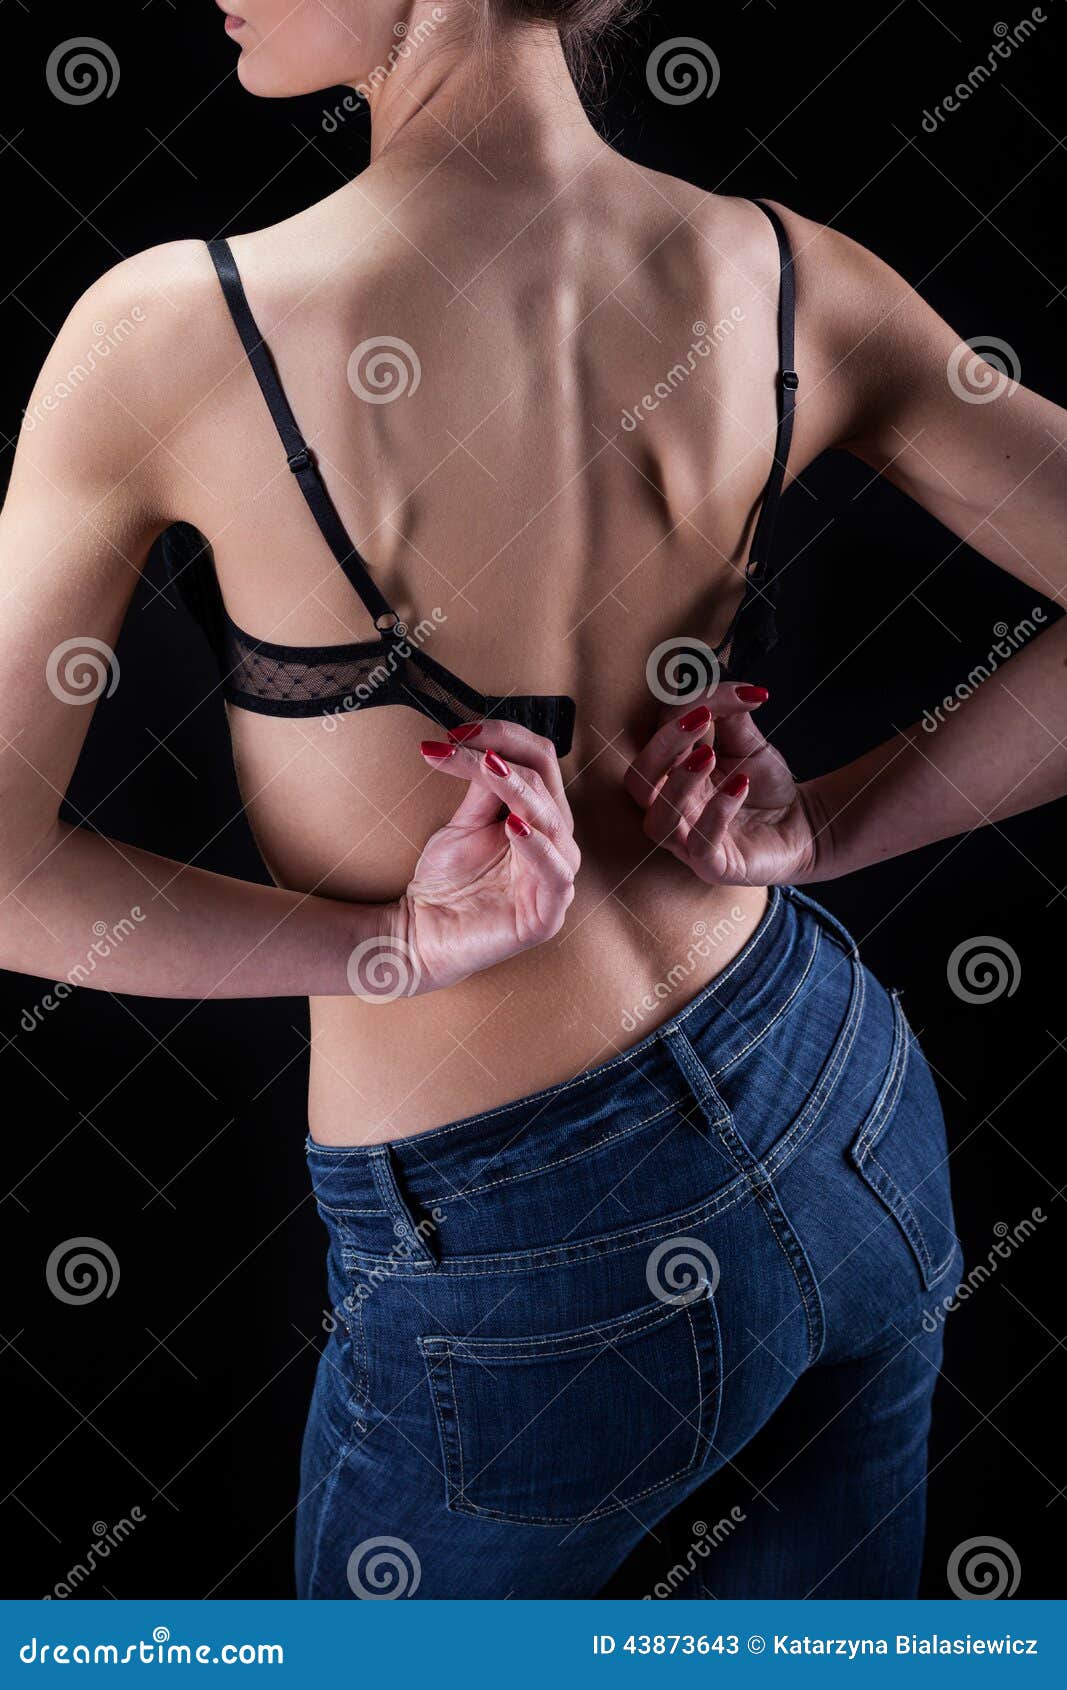 Hot Sensual Woman Taking Off Her Bra Stock Image - Image of long